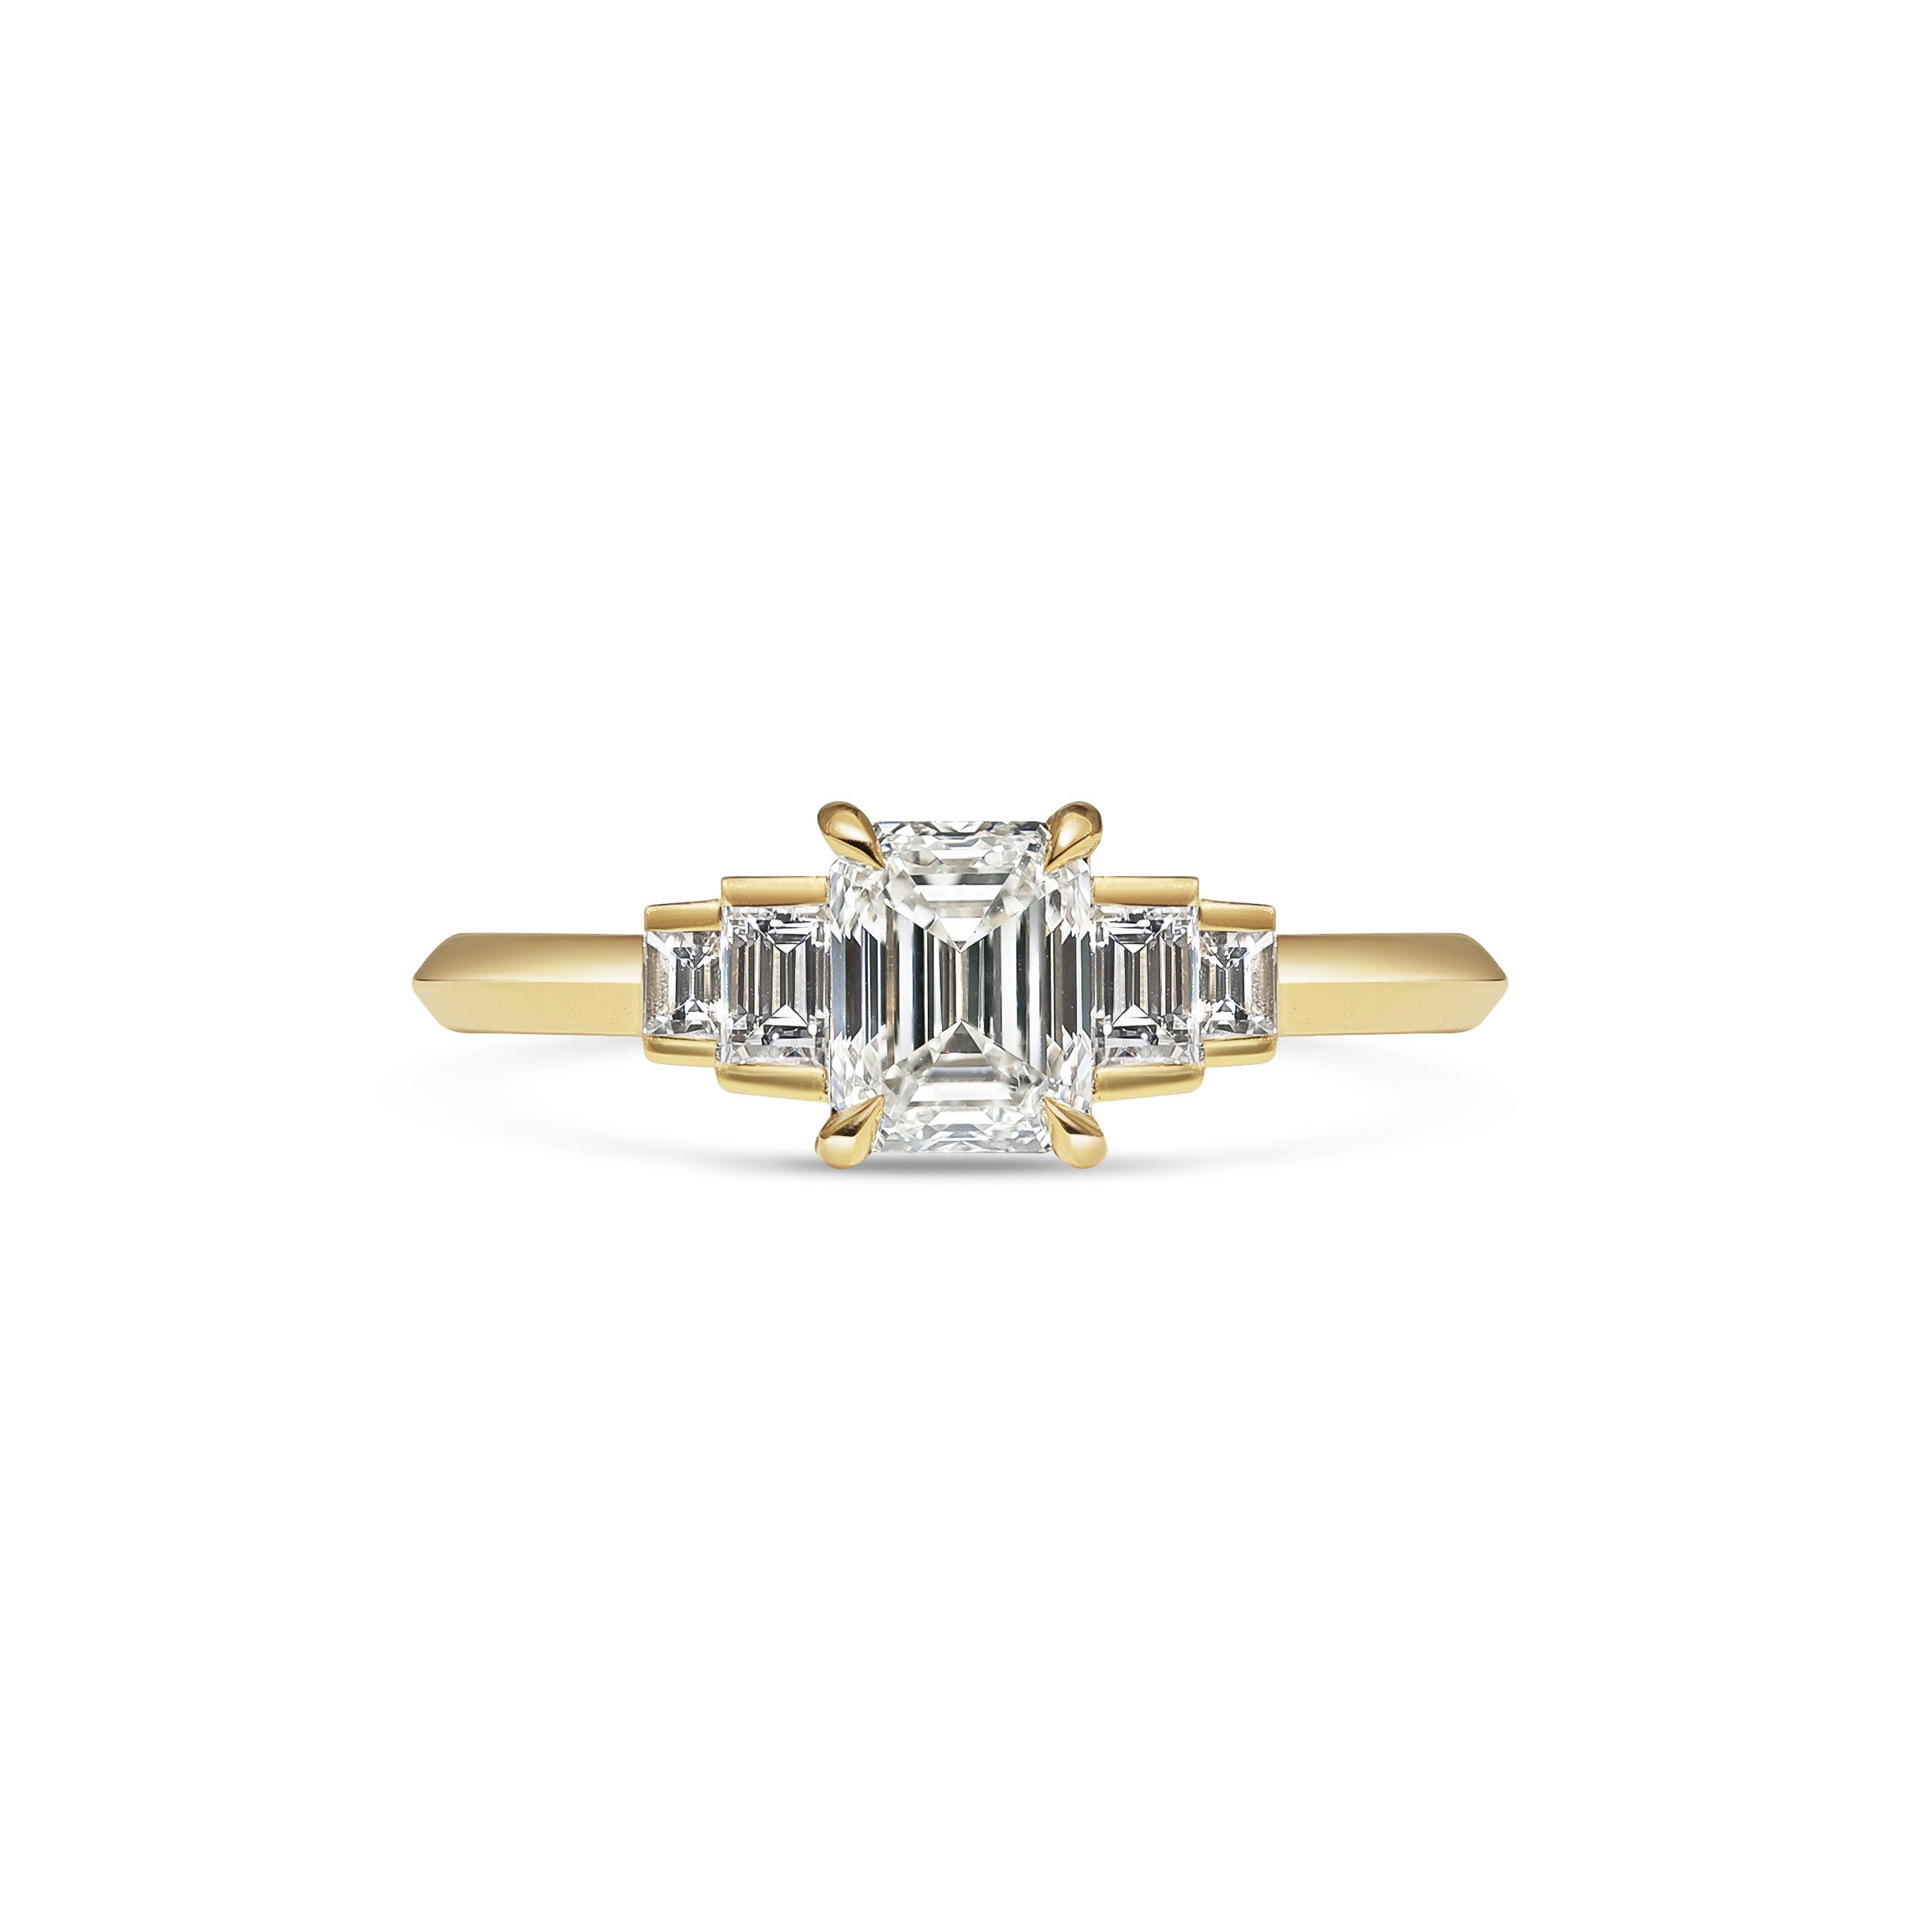 The Ida Ring - Emerald Cut 0.80ct - In Stock by East London jeweller Rachel Boston | Discover our collections of unique and timeless engagement rings, wedding rings, and modern fine jewellery.